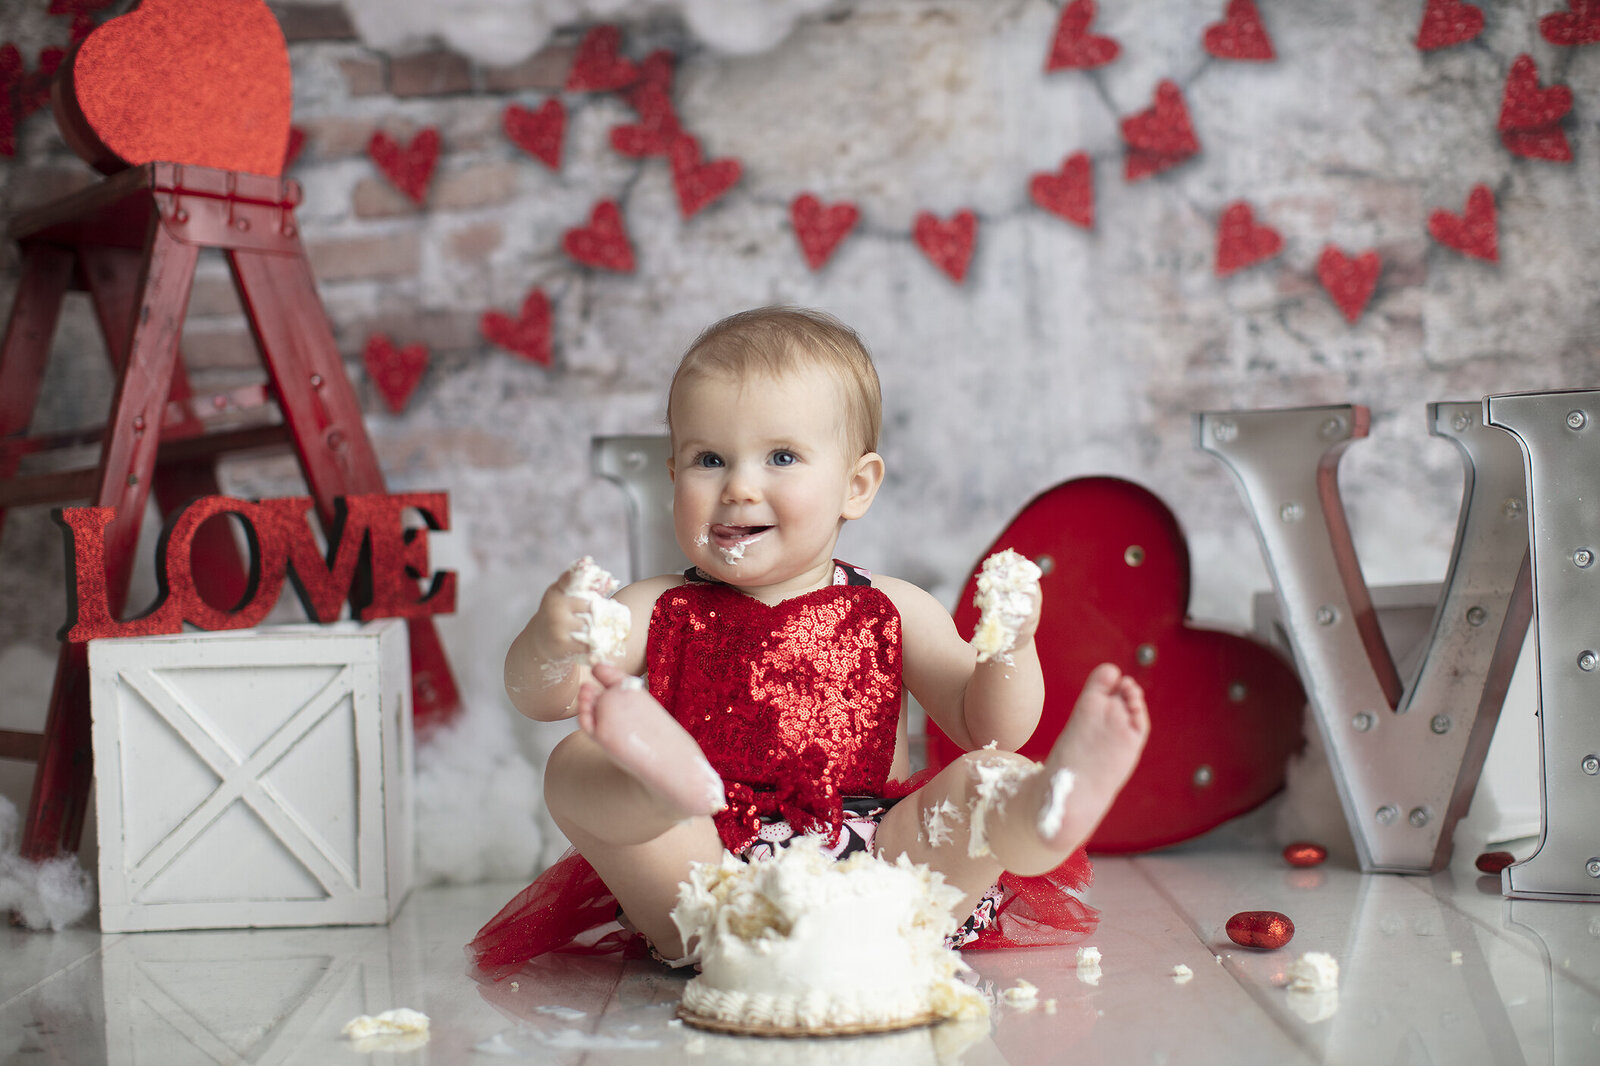 Valentine cake smash with little girl playing in cake.